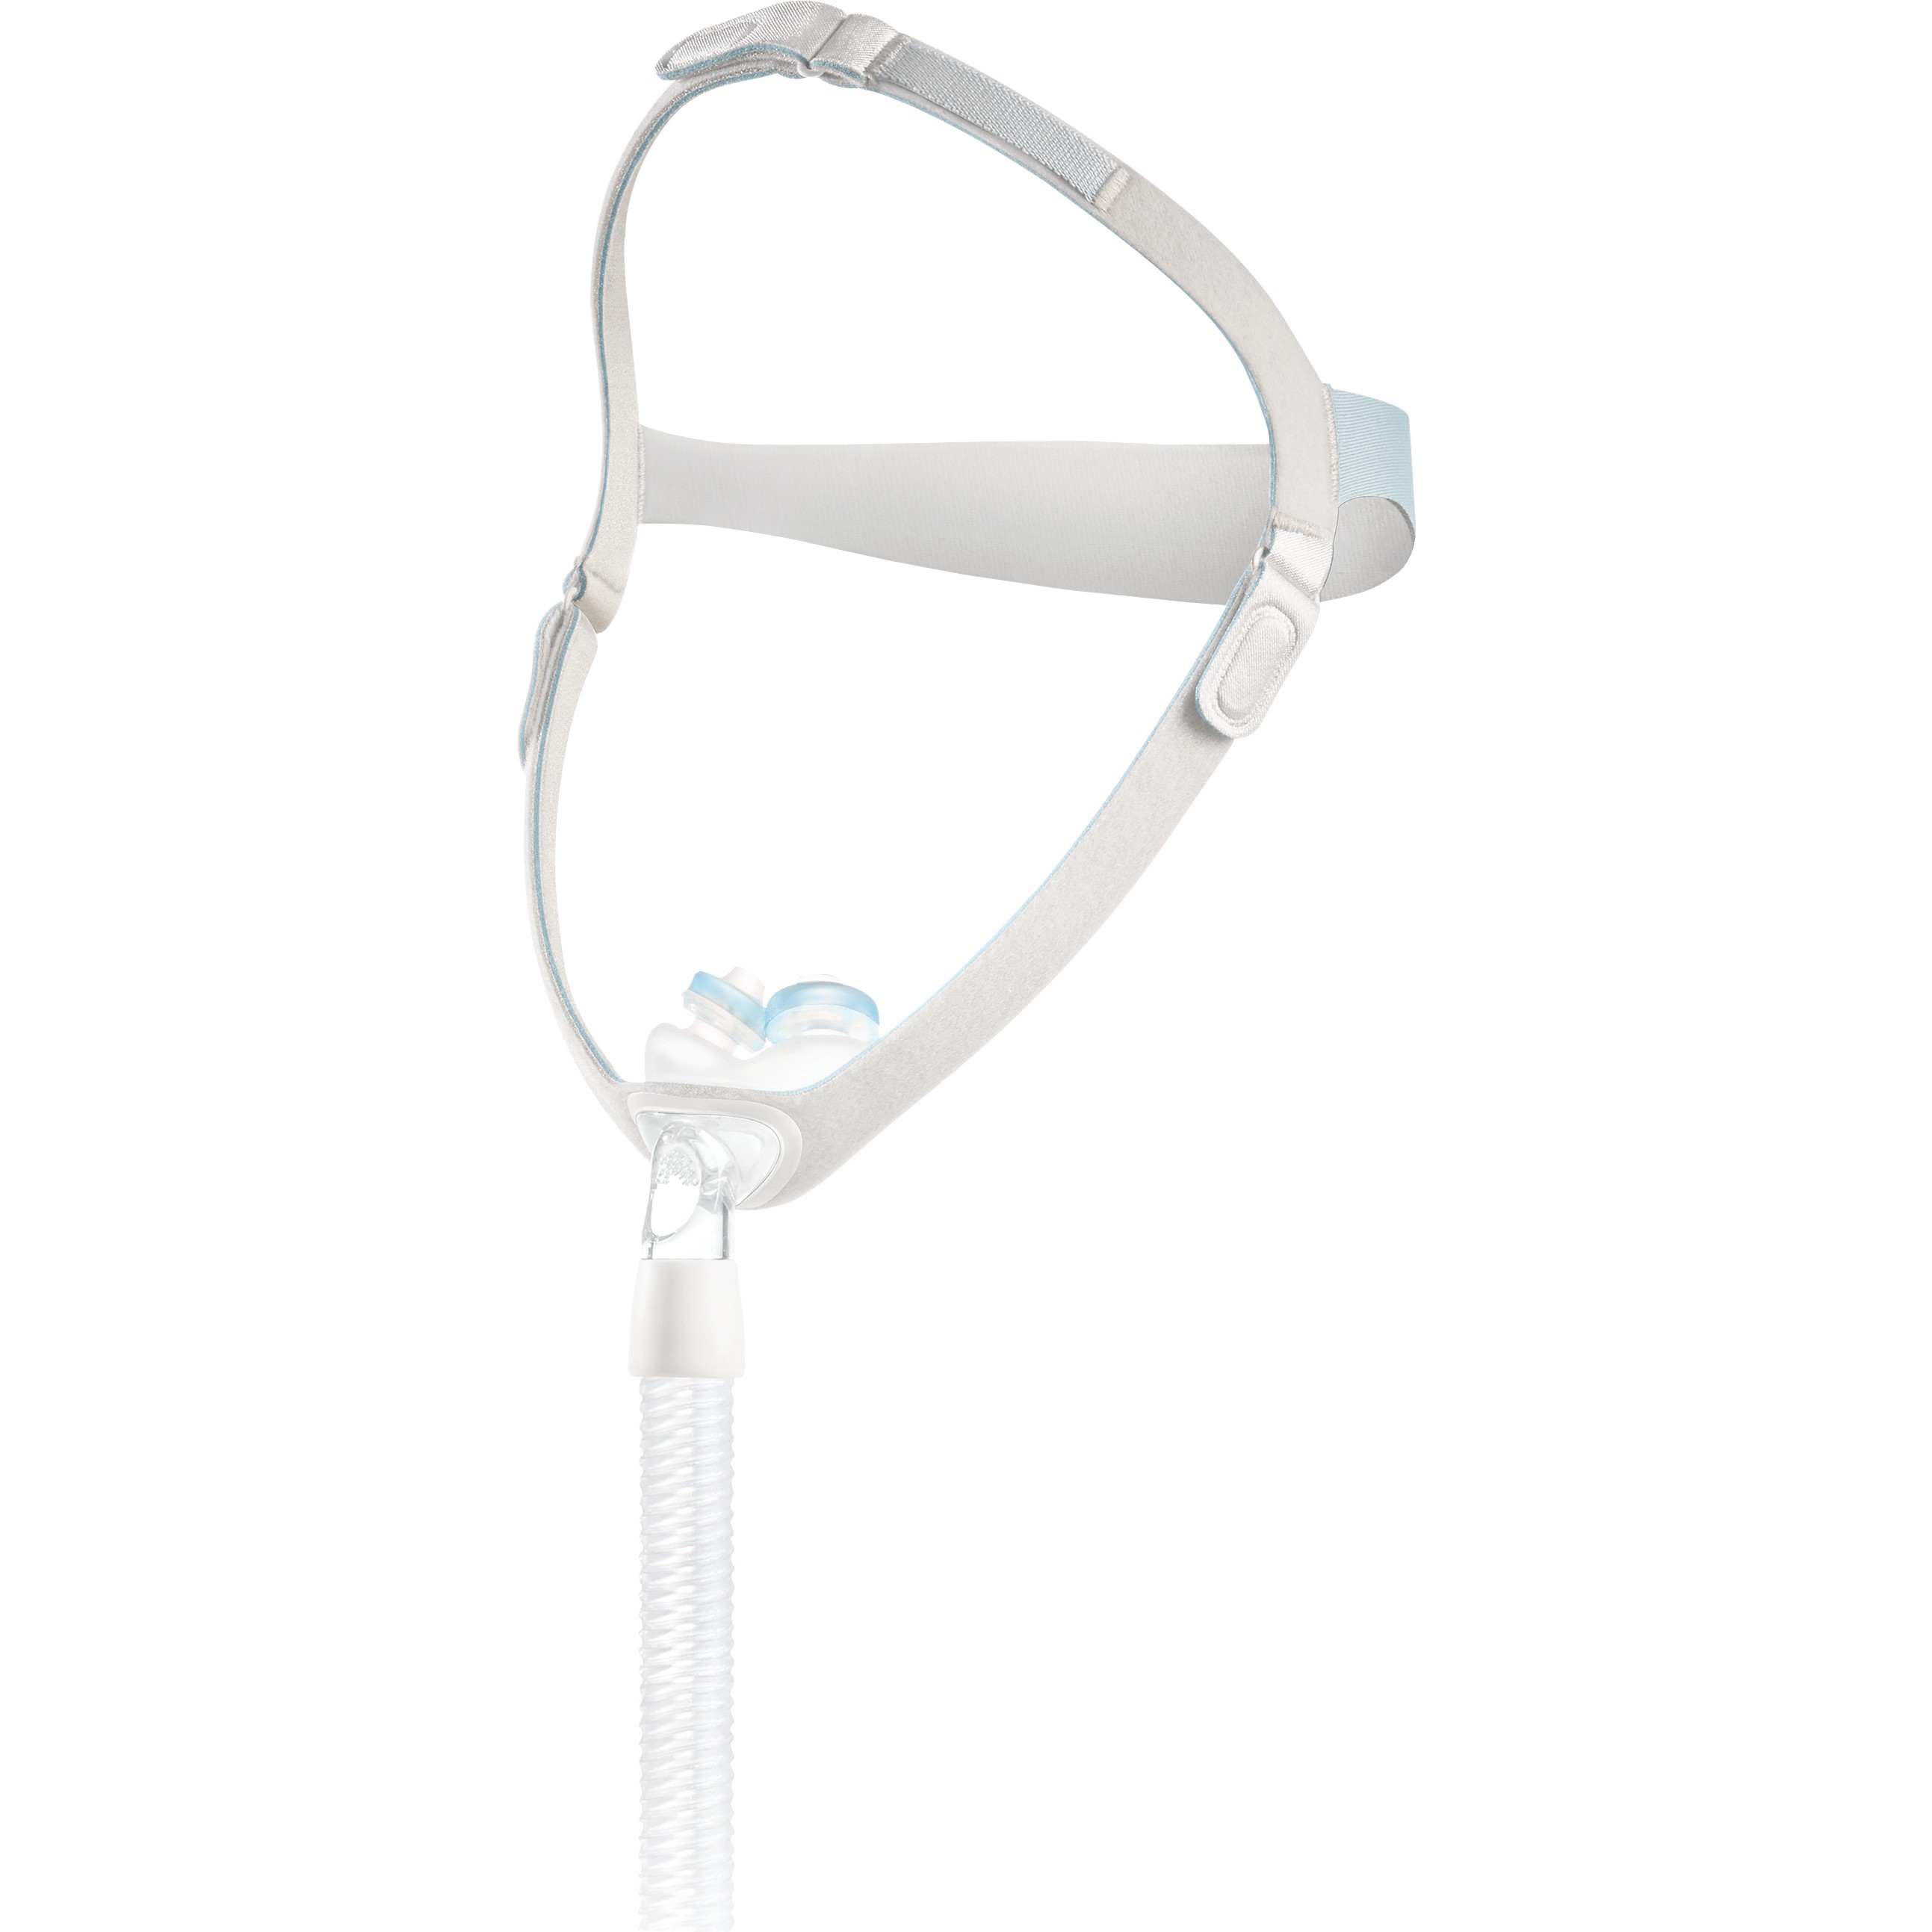 Nuance Pro Gel Nasal Pillow Mask Fitpack With Headgear By Philips Respironics